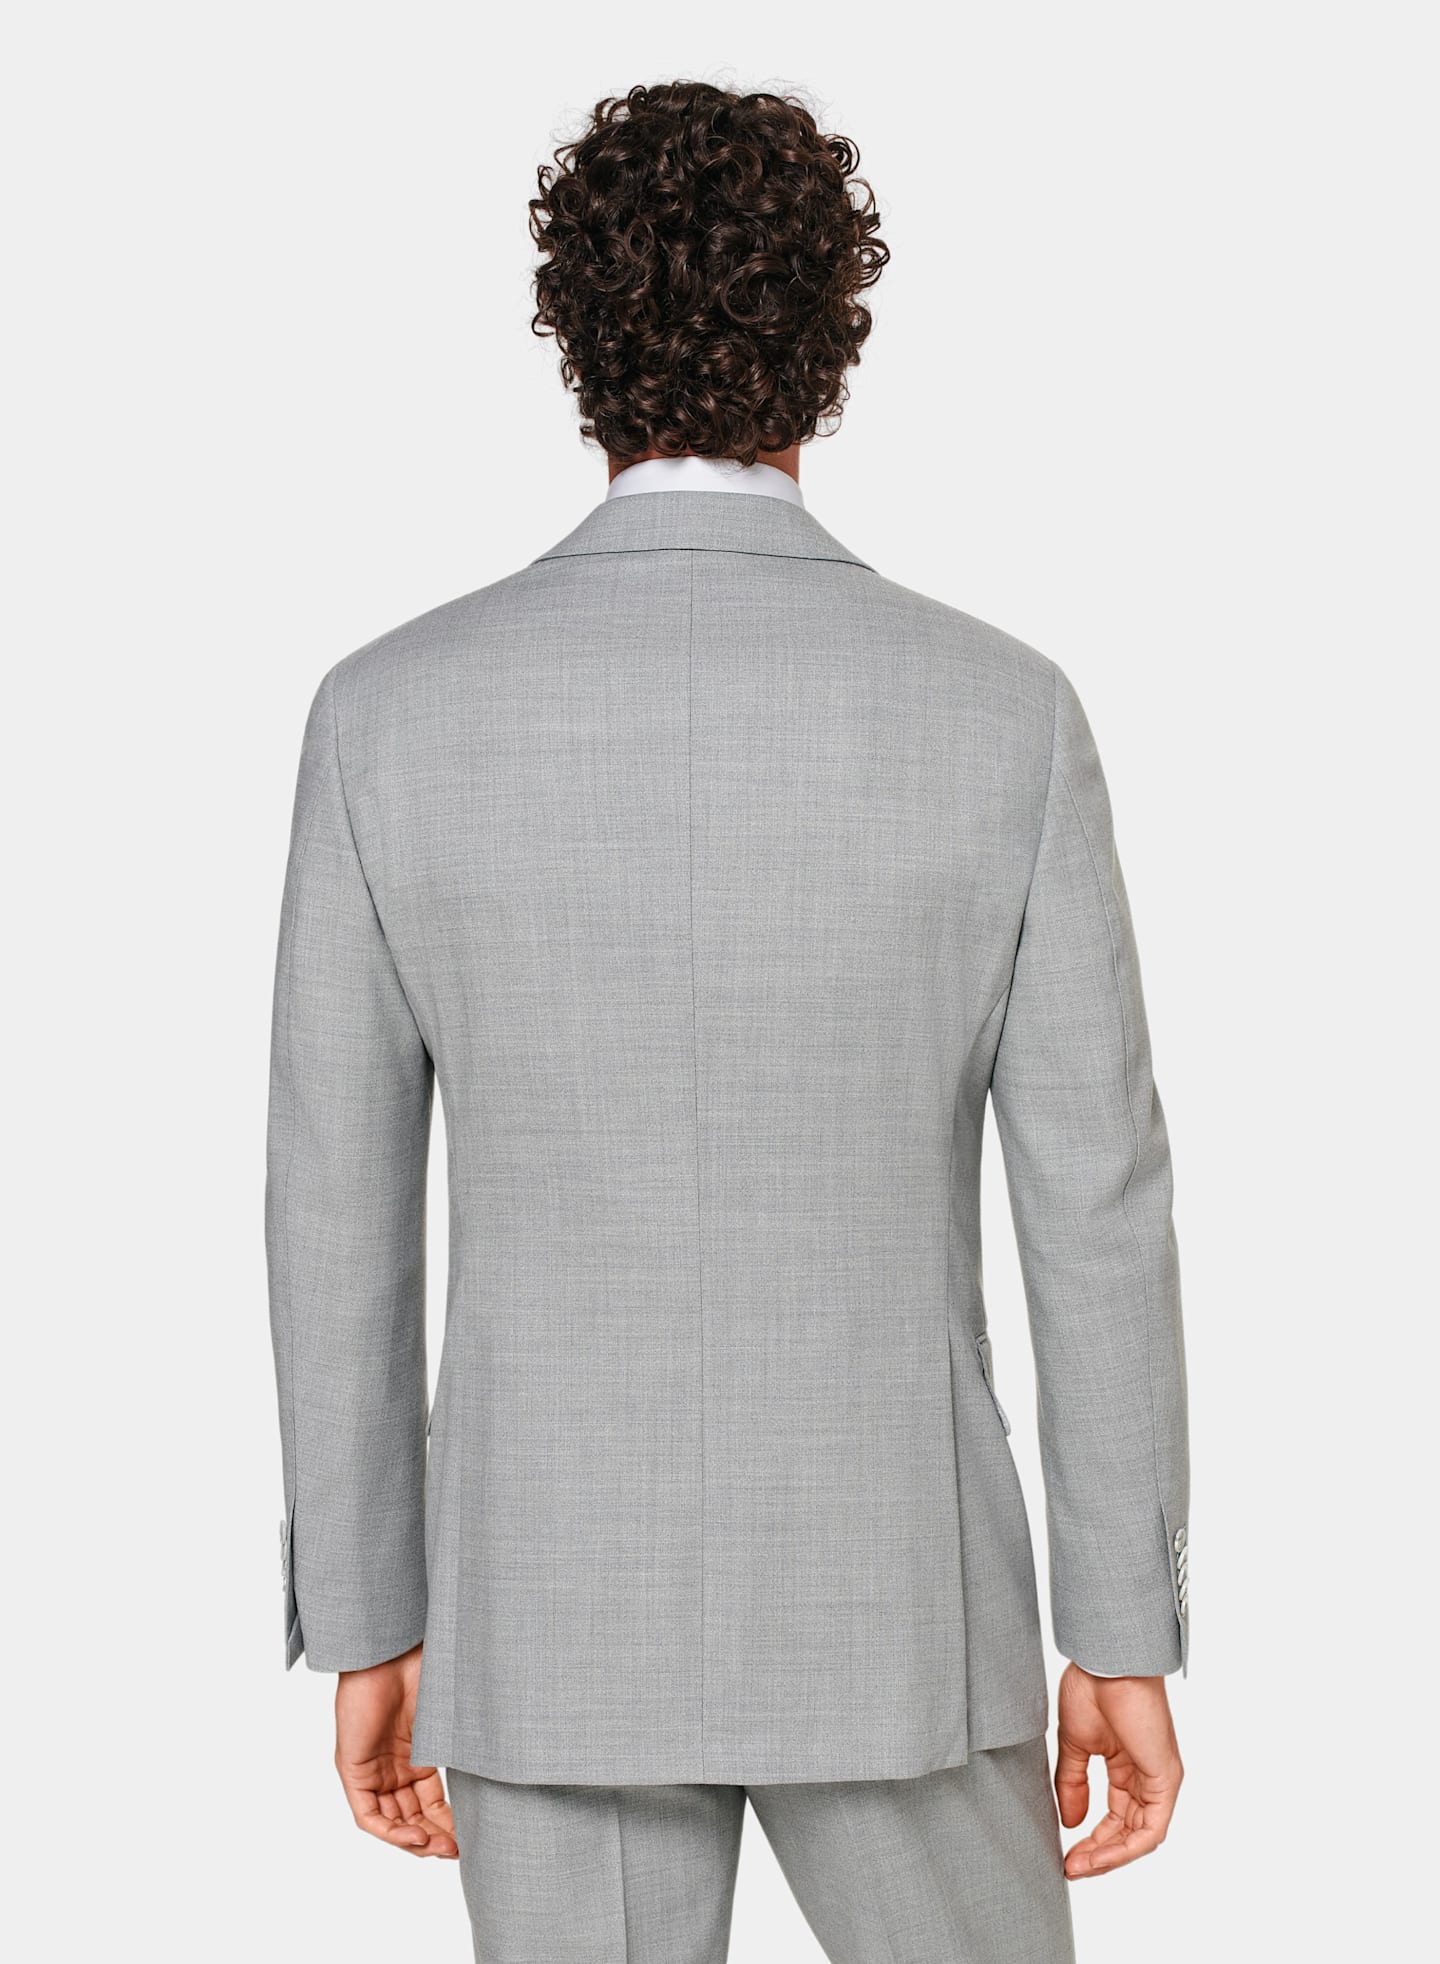 Rear view of grey relaxed fit suit